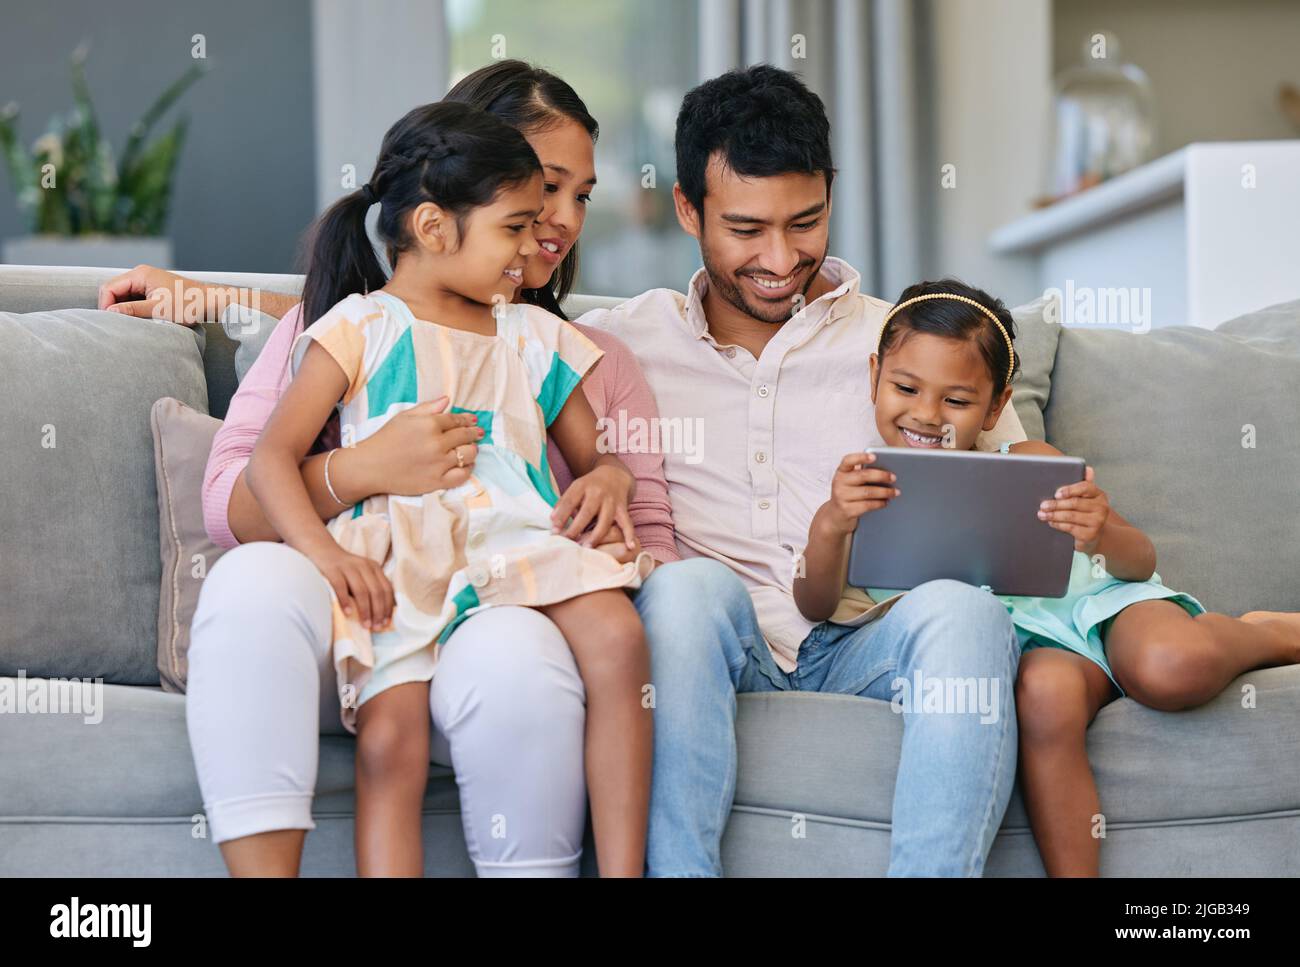 Technology can bring families together. a young family relaxing together while using a digital tablet. Stock Photo